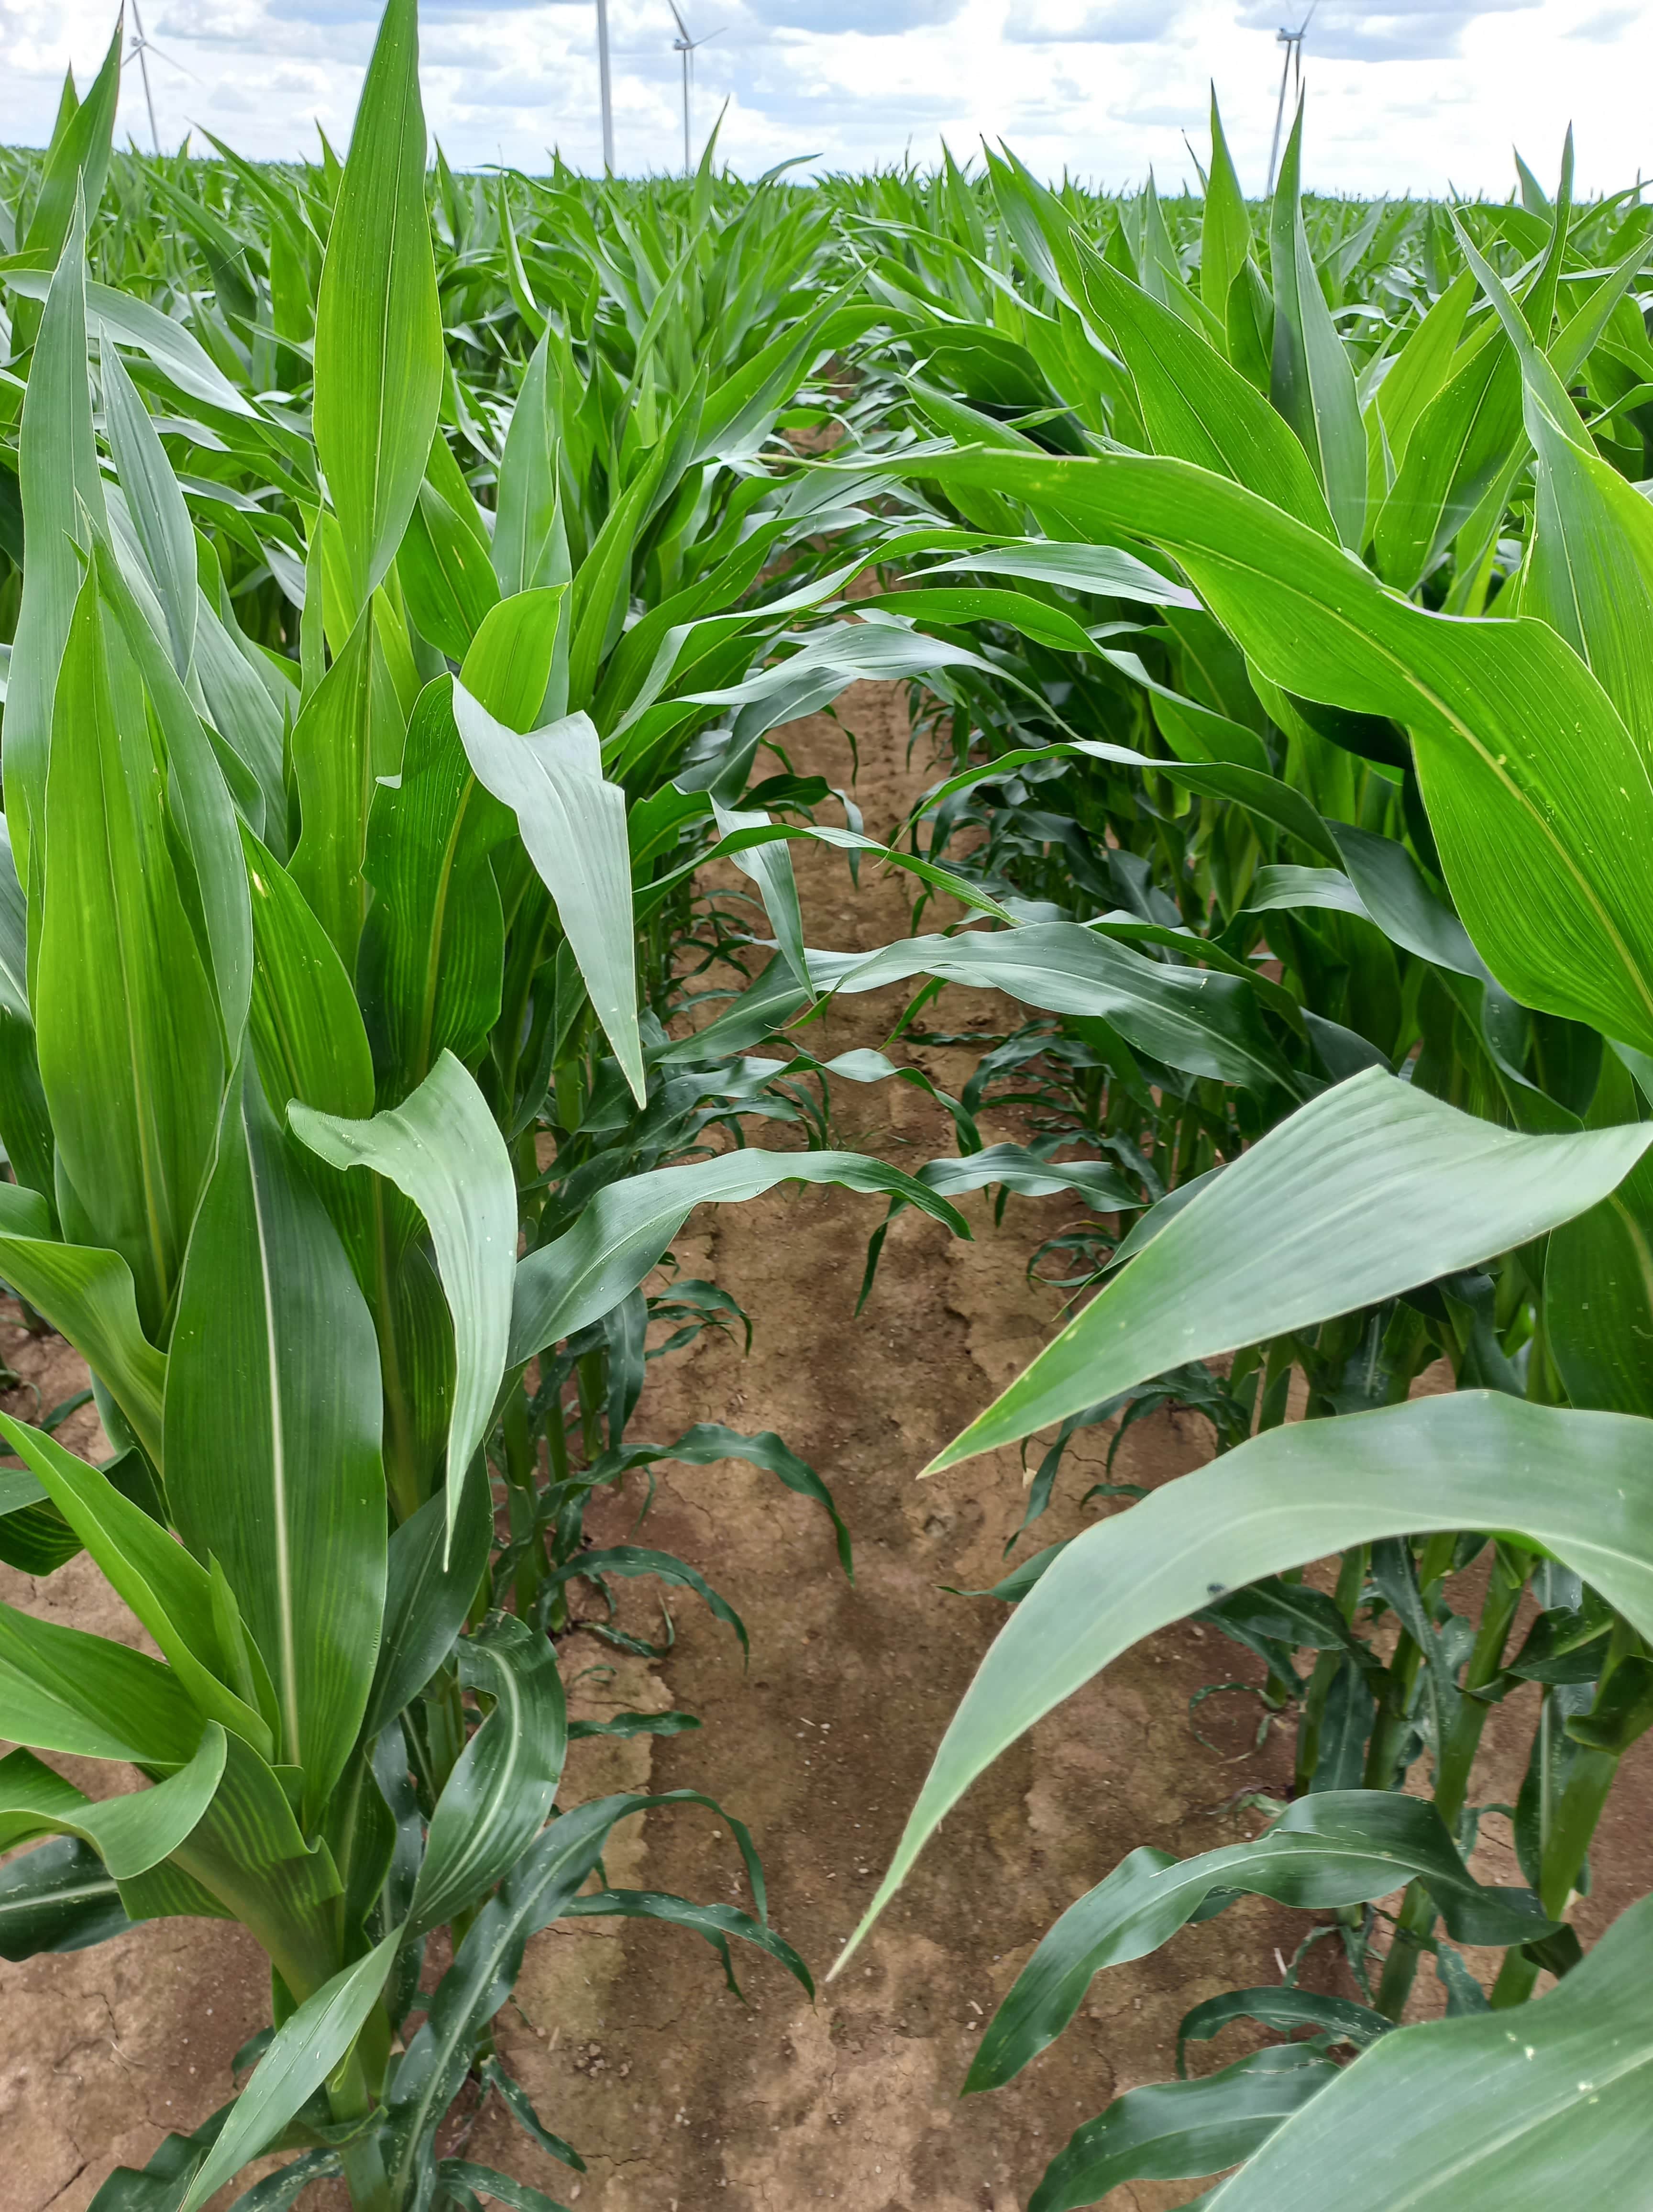 LID3910C
MID-EARLY MAIZE